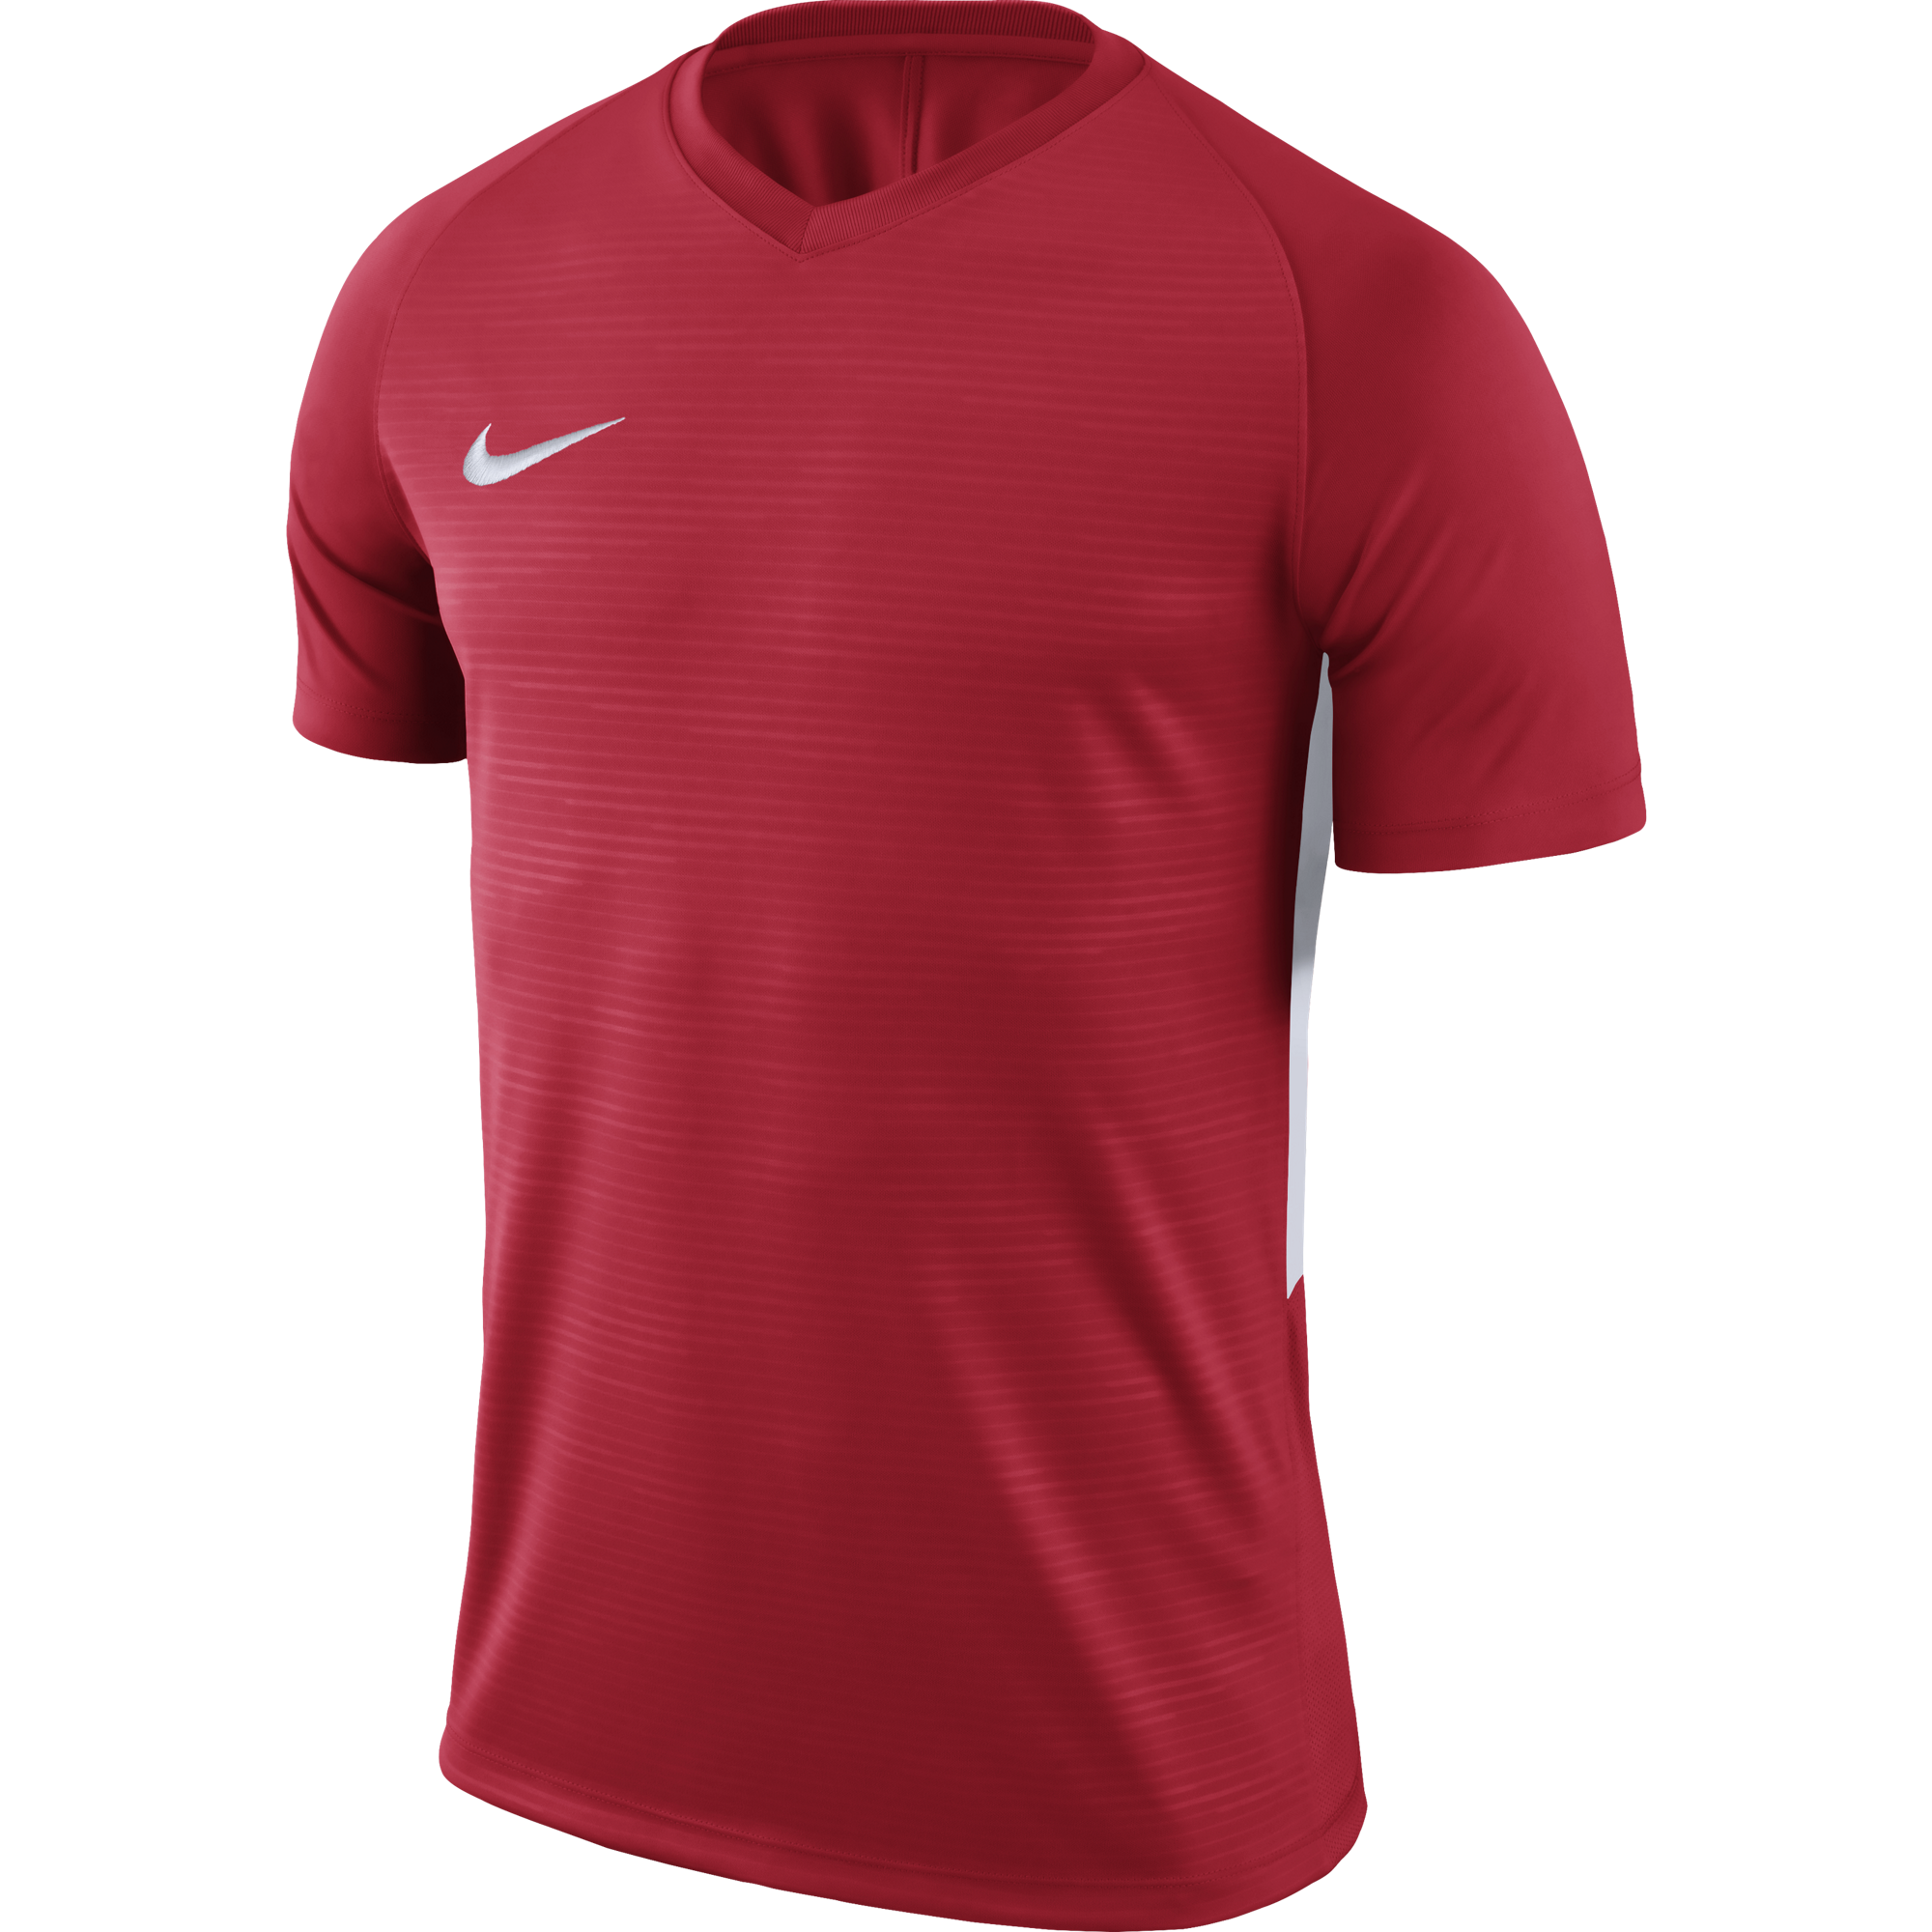 Previs site Fruitig Maan oppervlakte Nike Tiempo Jersey - University Red / White - Youth – Playmaker Sports